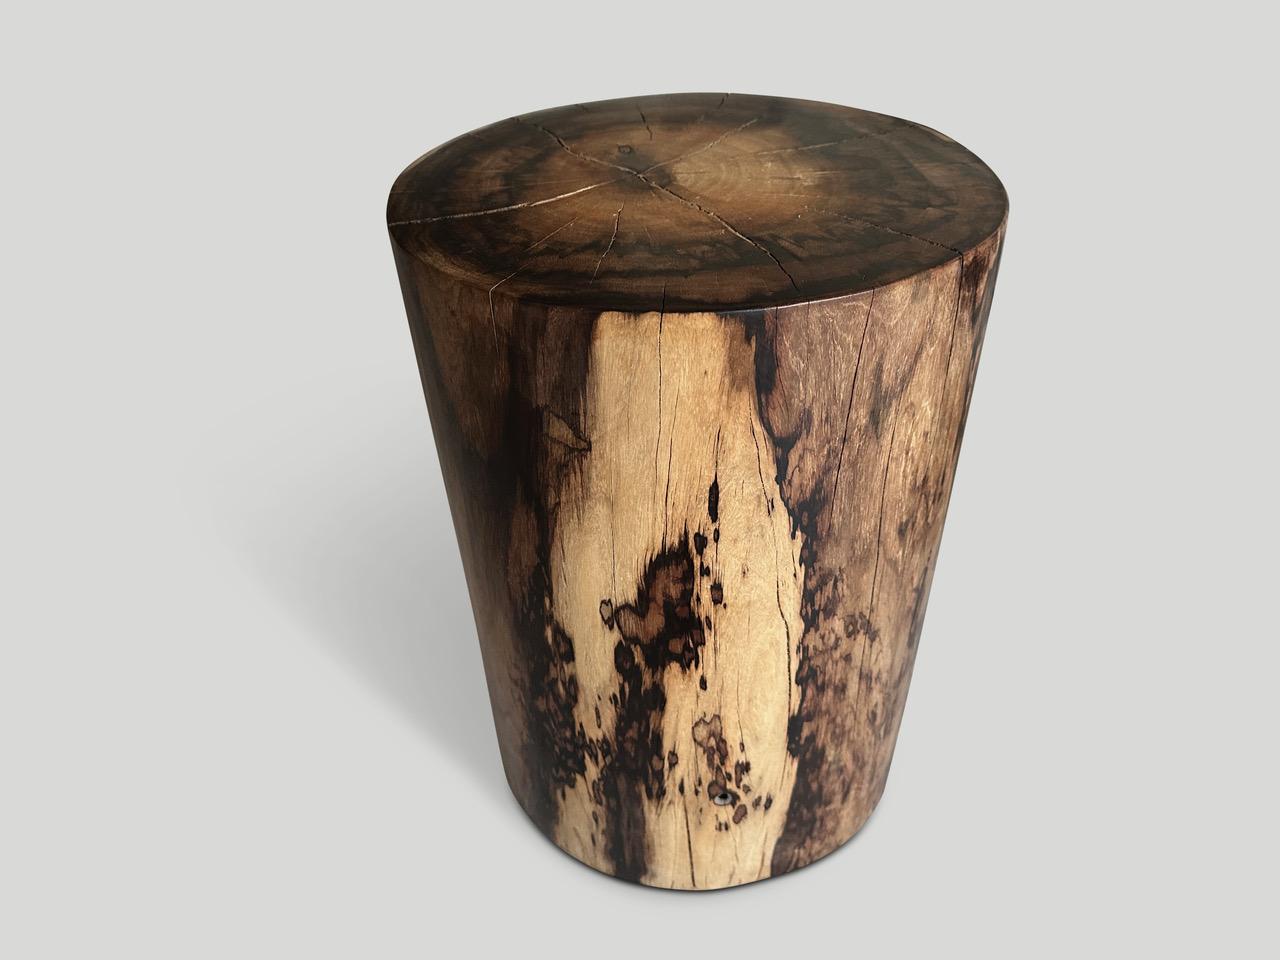 Exquisite rosewood side table or stool with stunning contrasting tones. Finished with a natural oil revealing the beautiful wood grain. We have a collection. The price and images reflect the one shown. 

Own an Andrianna Shamaris